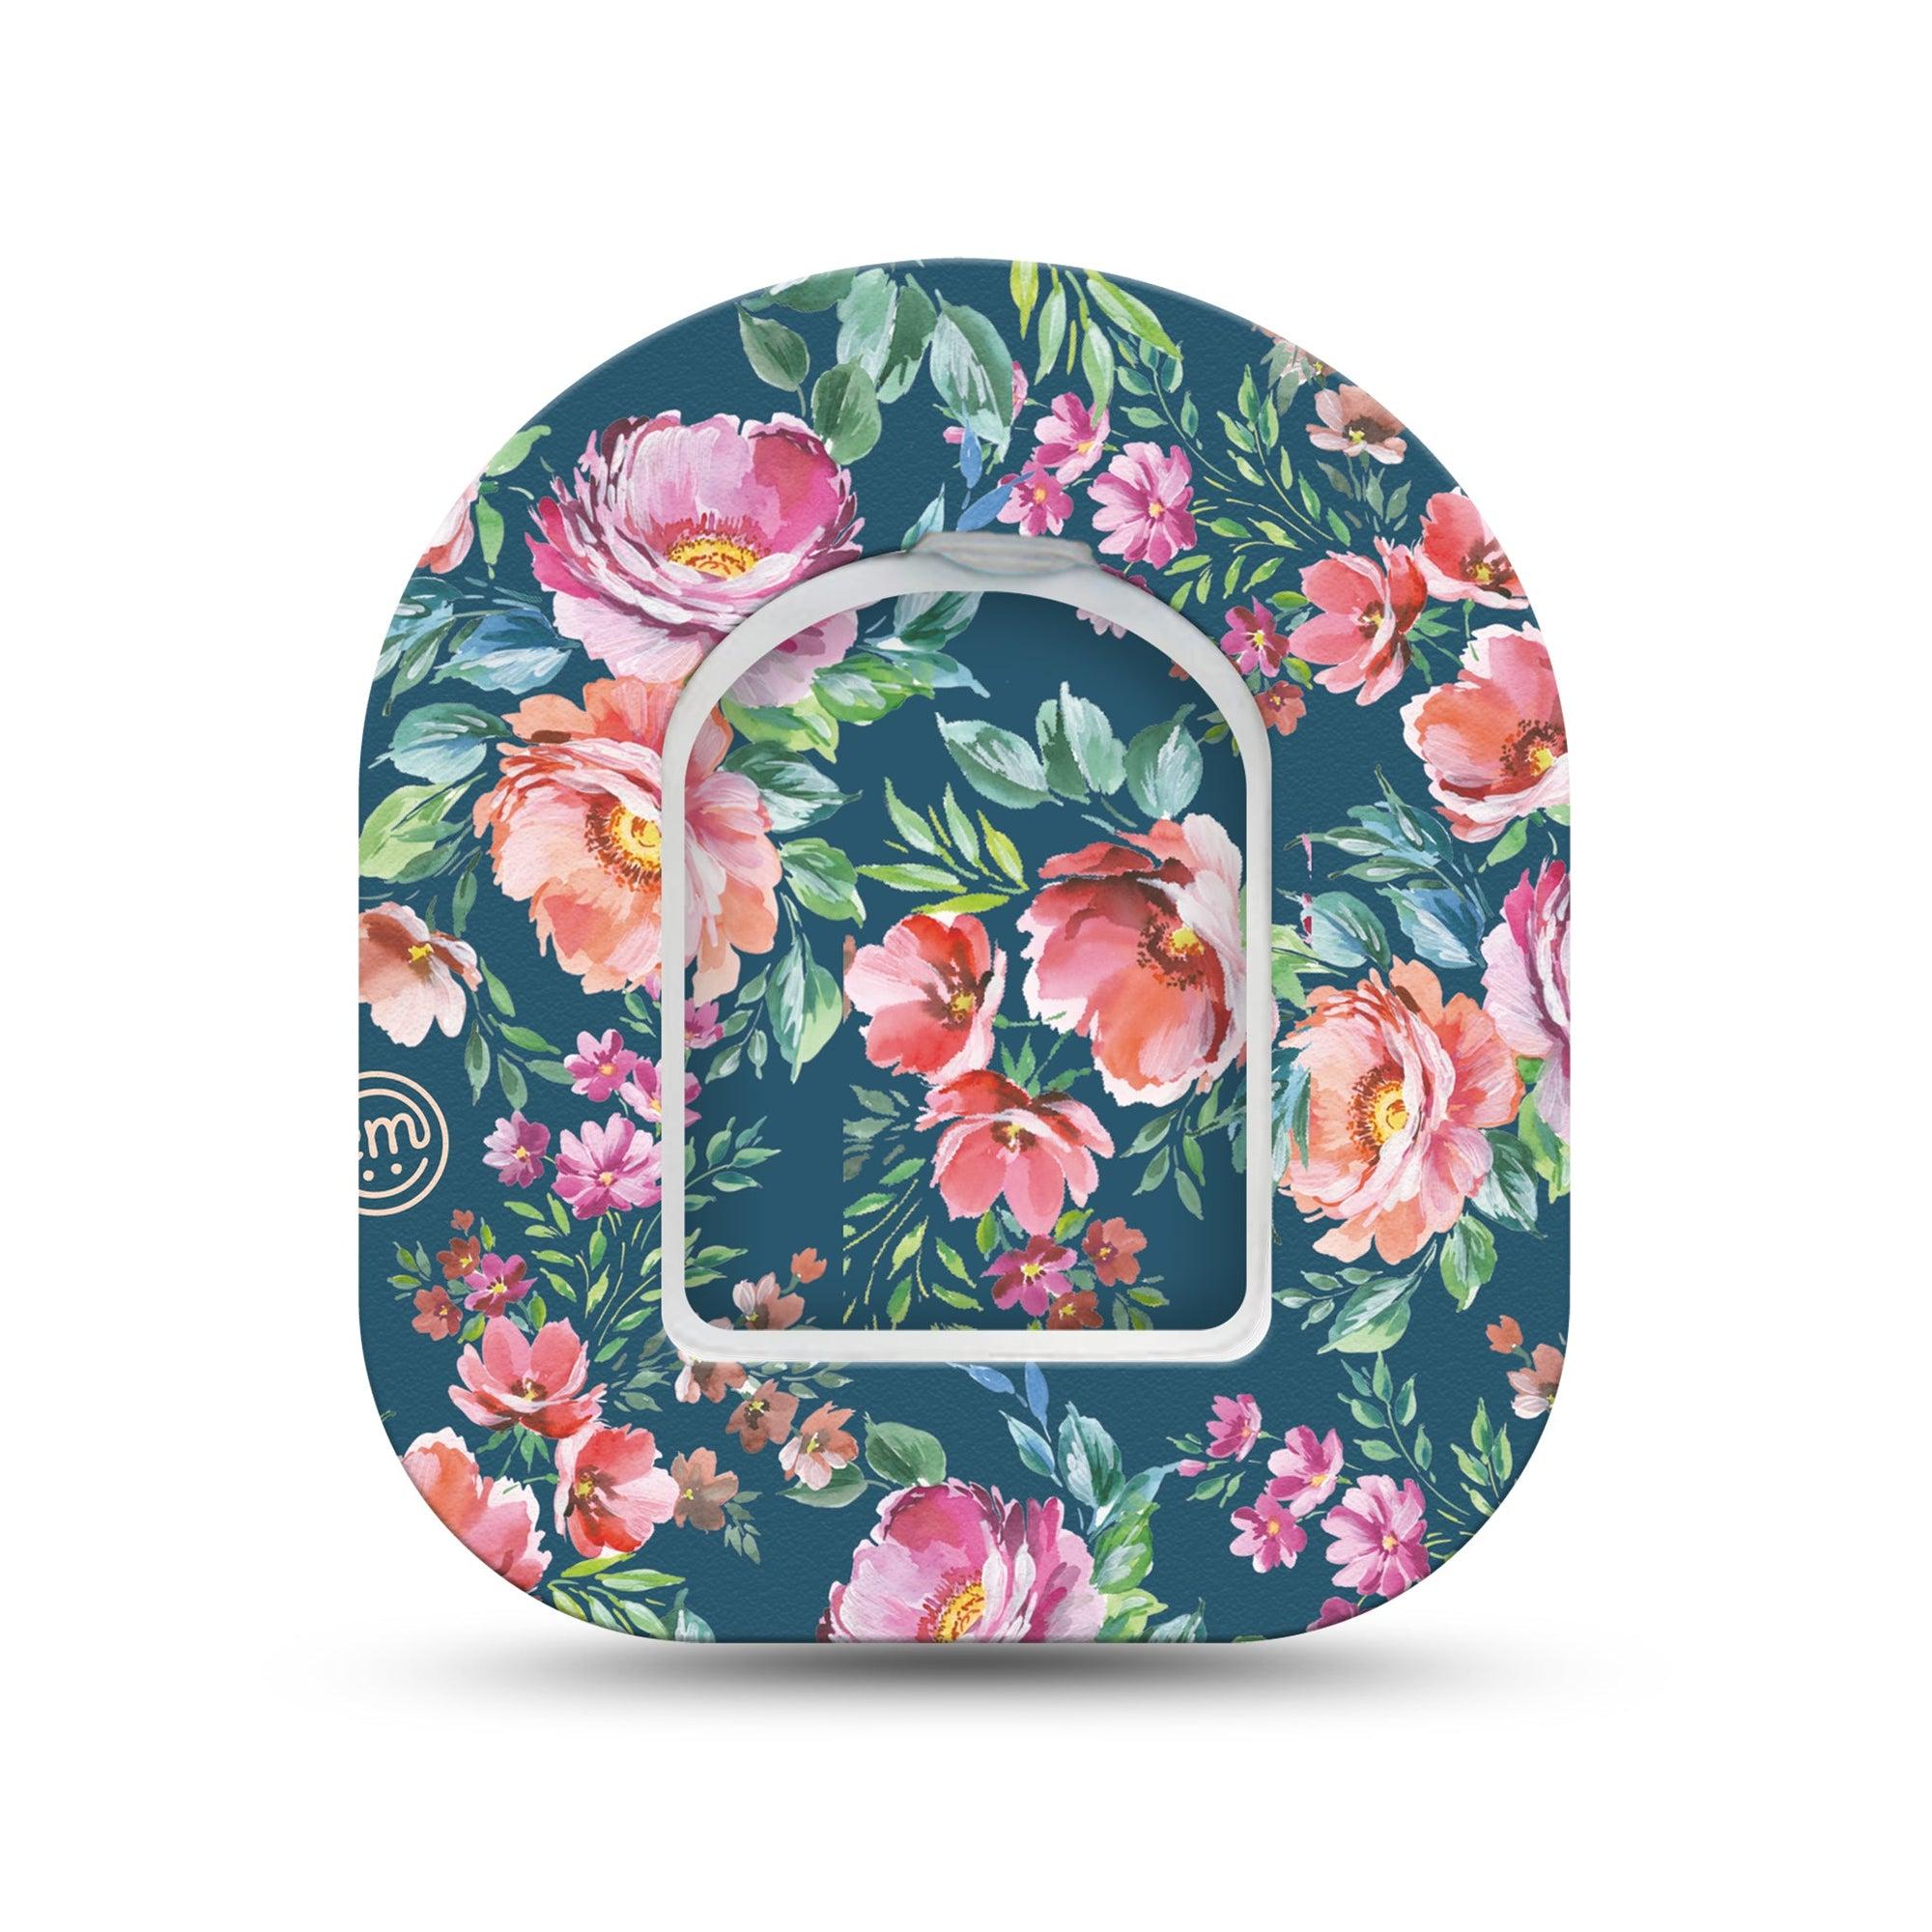 ExpressionMed Floral Enchantment Omnipod Surface Center Sticker and Mini Tape Floral Garden Inspired Vinyl Sticker and Tape Design Pump Design